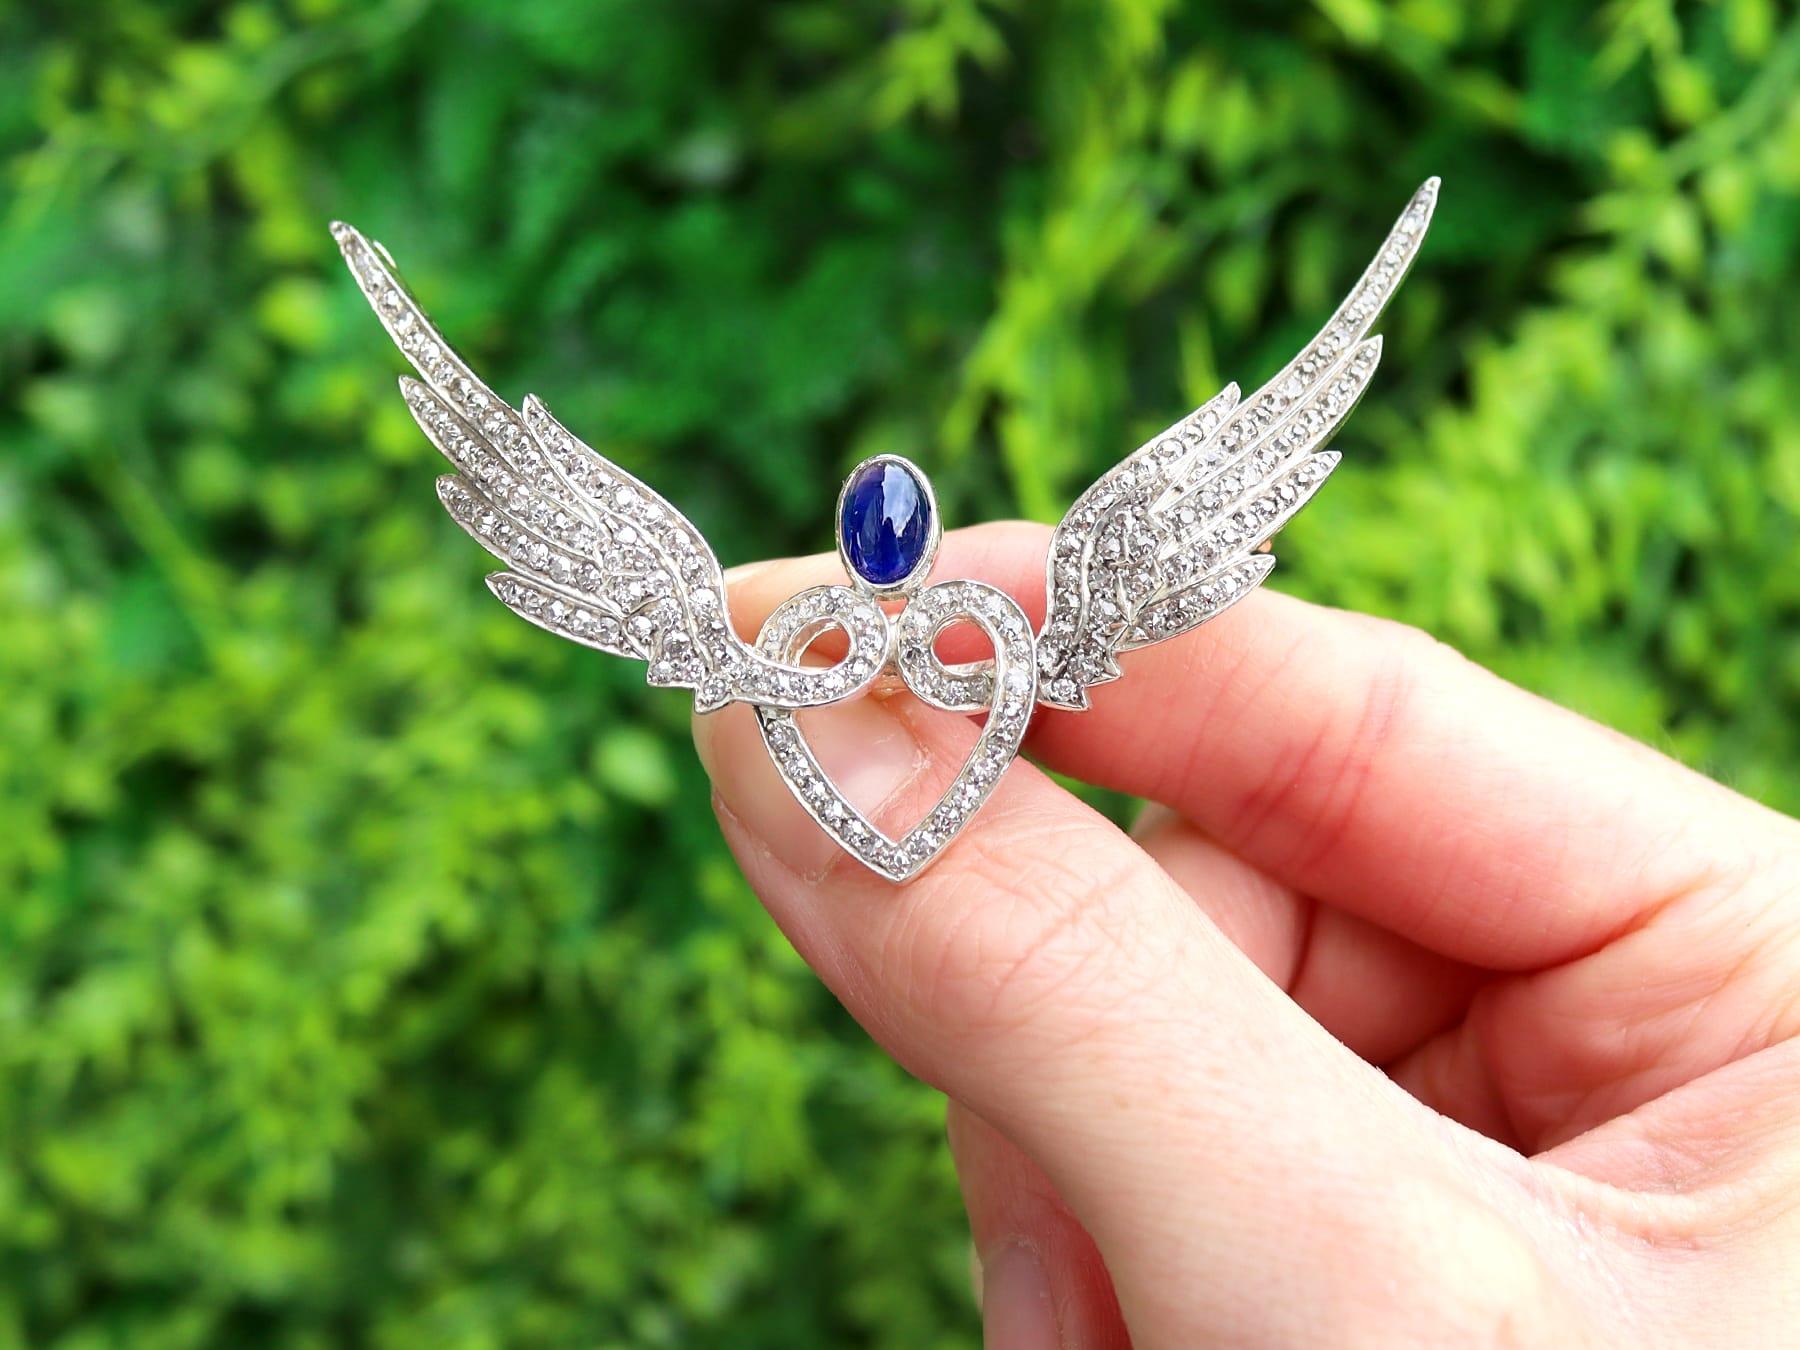 A stunning, fine and impressive, large 1.55 carat sapphire and 2.20 carat diamond, 10 carat yellow gold and silver set sweetheart brooch/pendant with wings; part of our diverse antique jewellery collections.

This stunning, fine and impressive